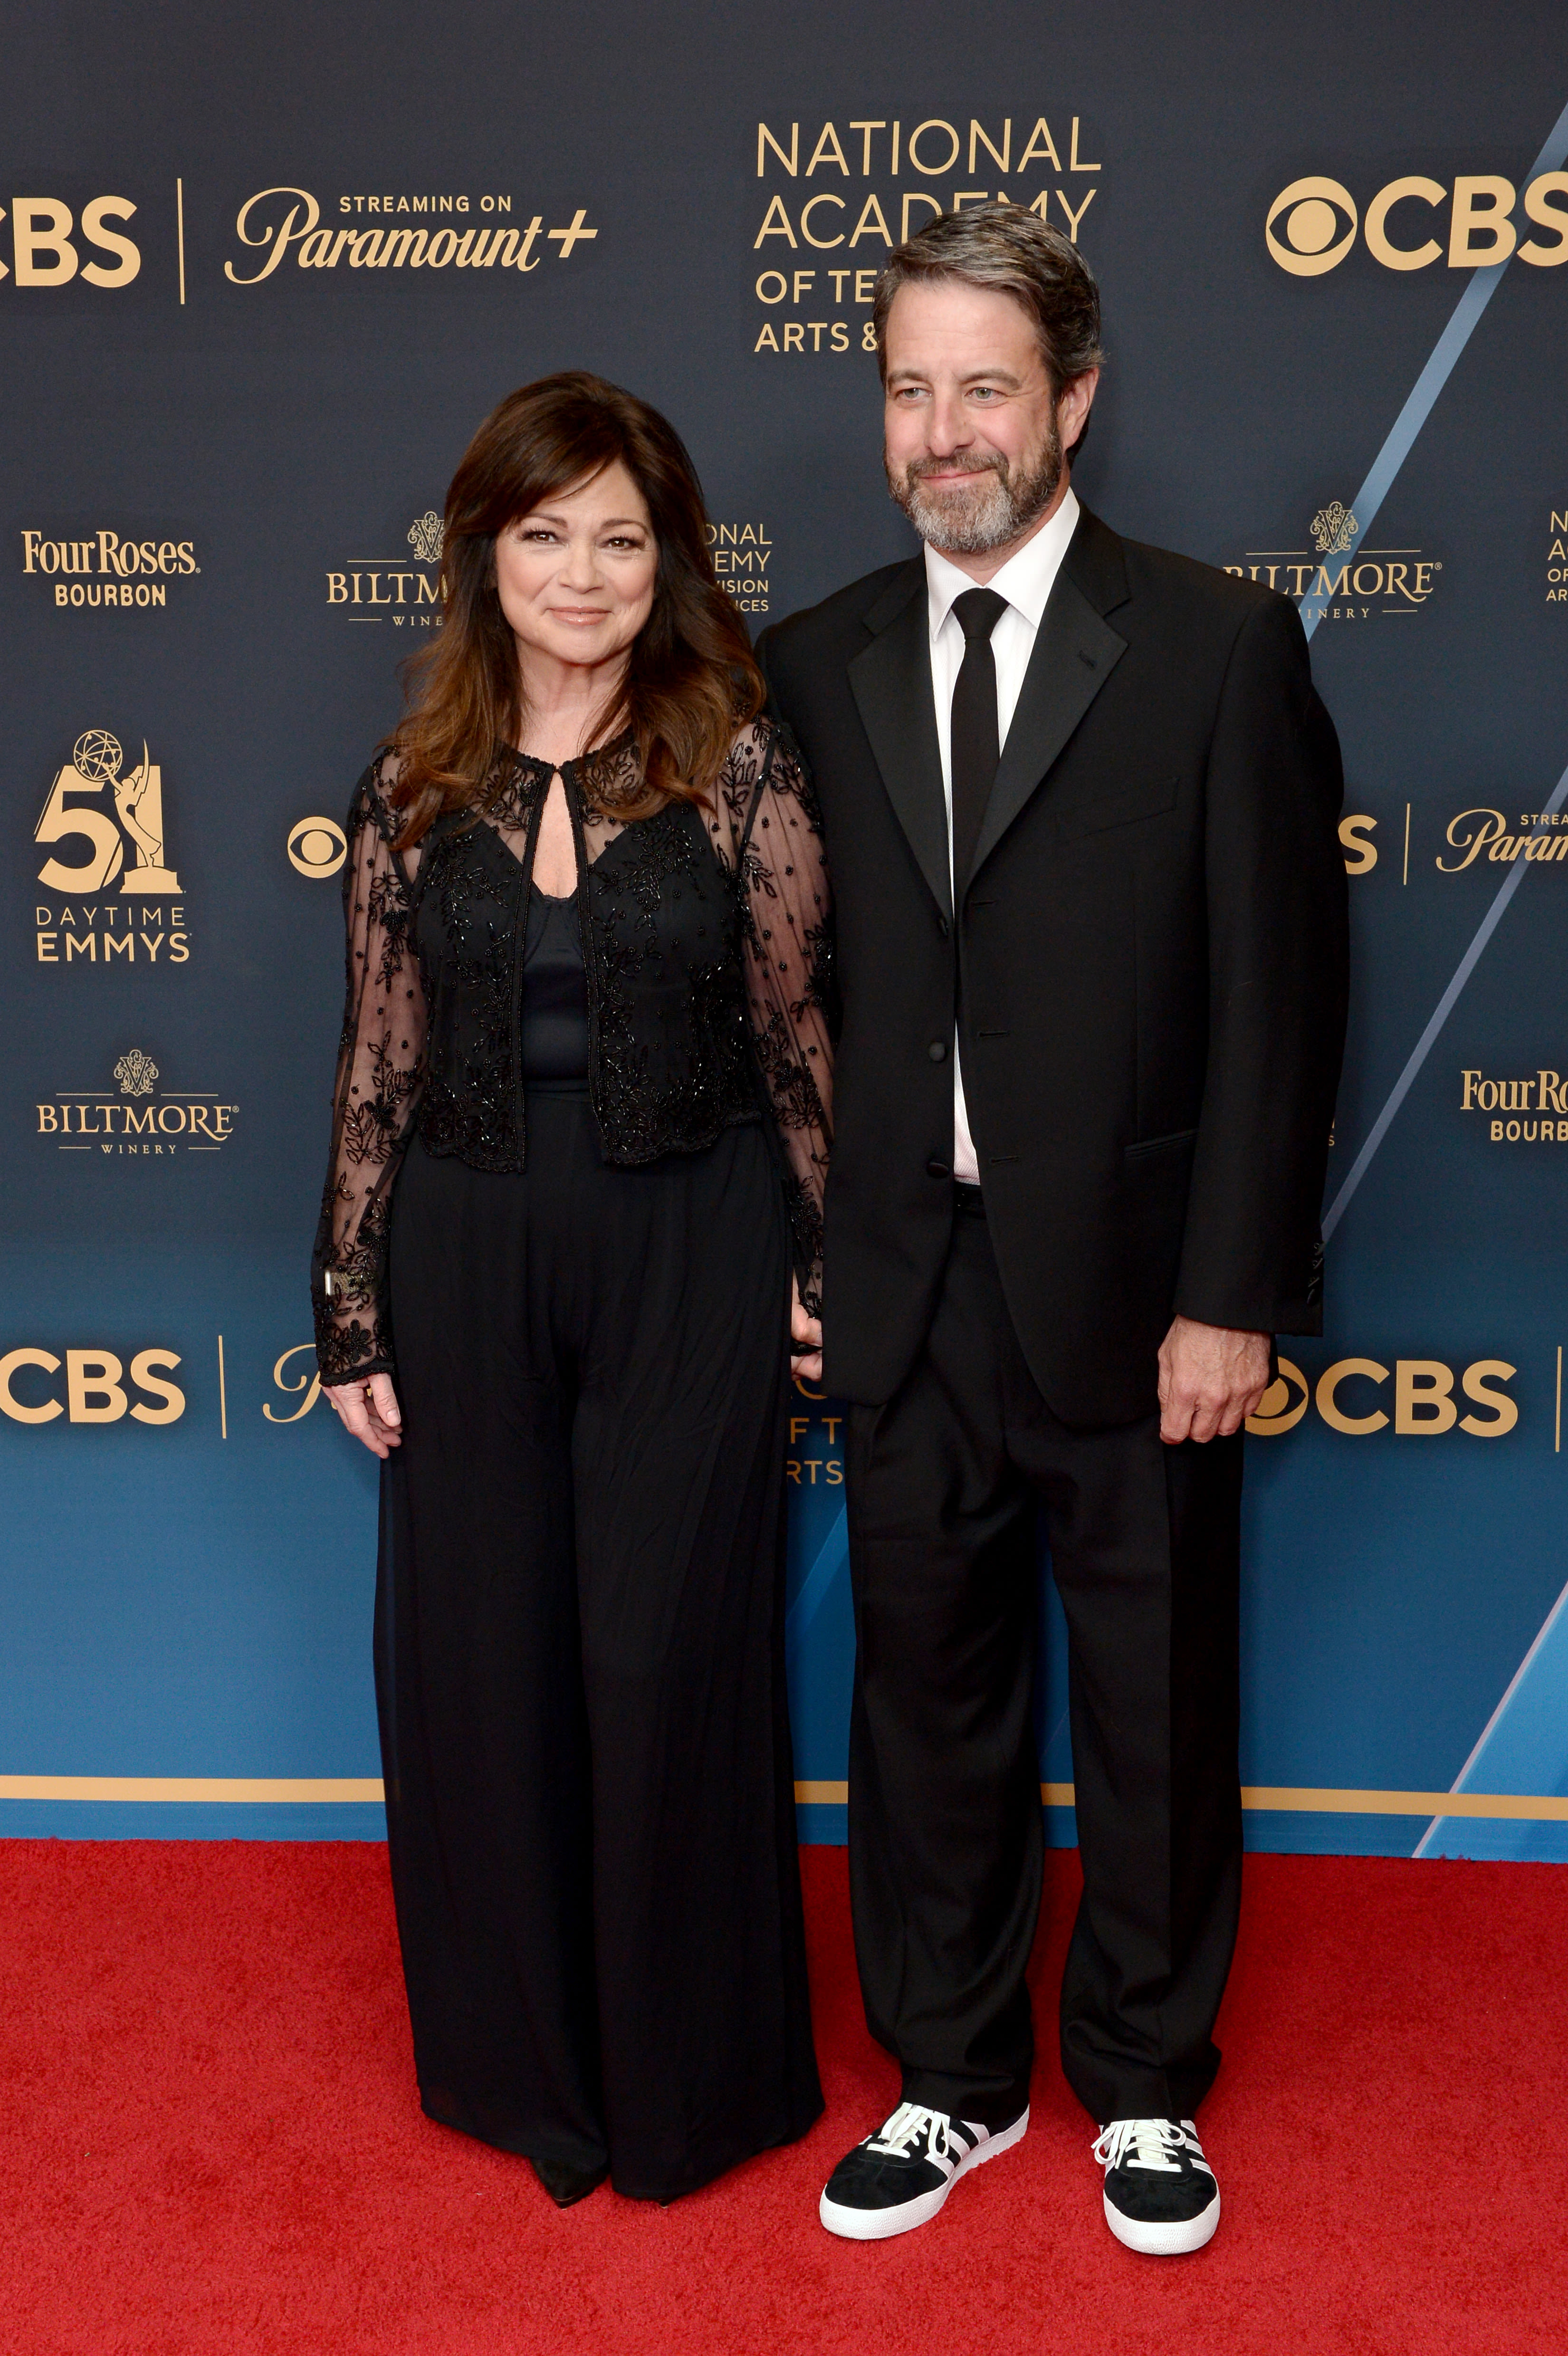 Valerie Bertinelli and Mike Goodnough Are ‘Racking Up Frequent-Flier Miles’ in Long-Distance Romance